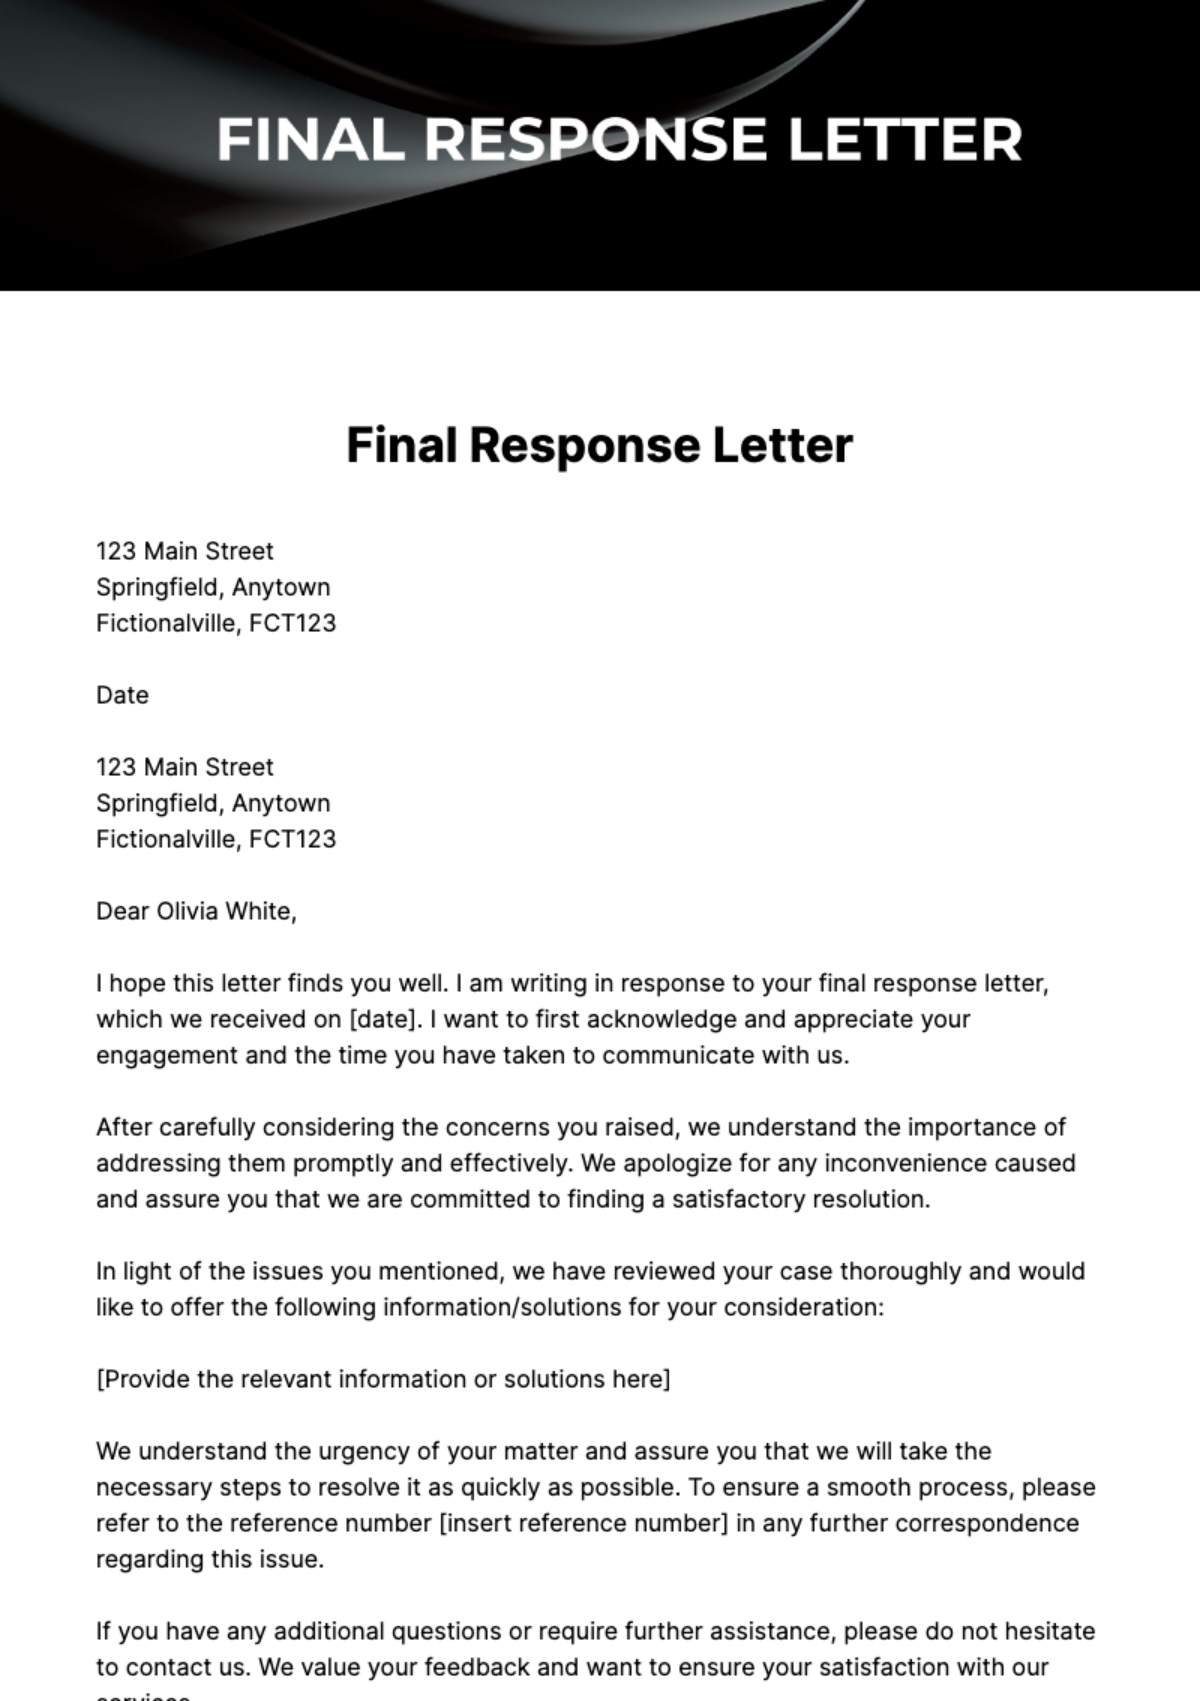 Free Final Response Letter Template